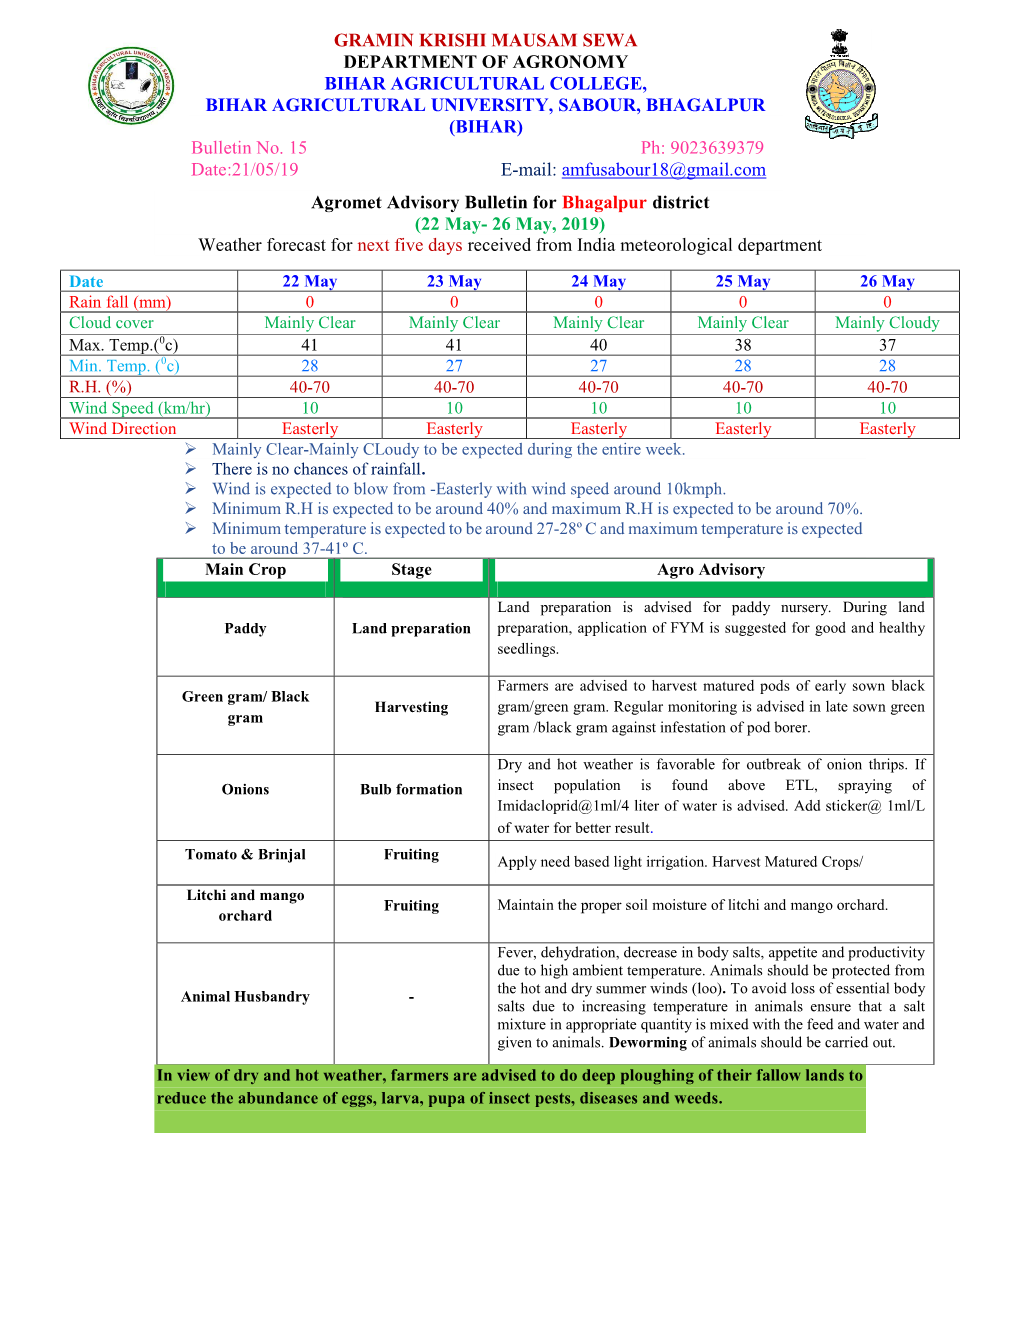 Agromet Advisory Bulletin for Bhagalpur District (22 May- 26 May, 2019) Weather Forecast for Next Five Days Received from India Meteorological Department